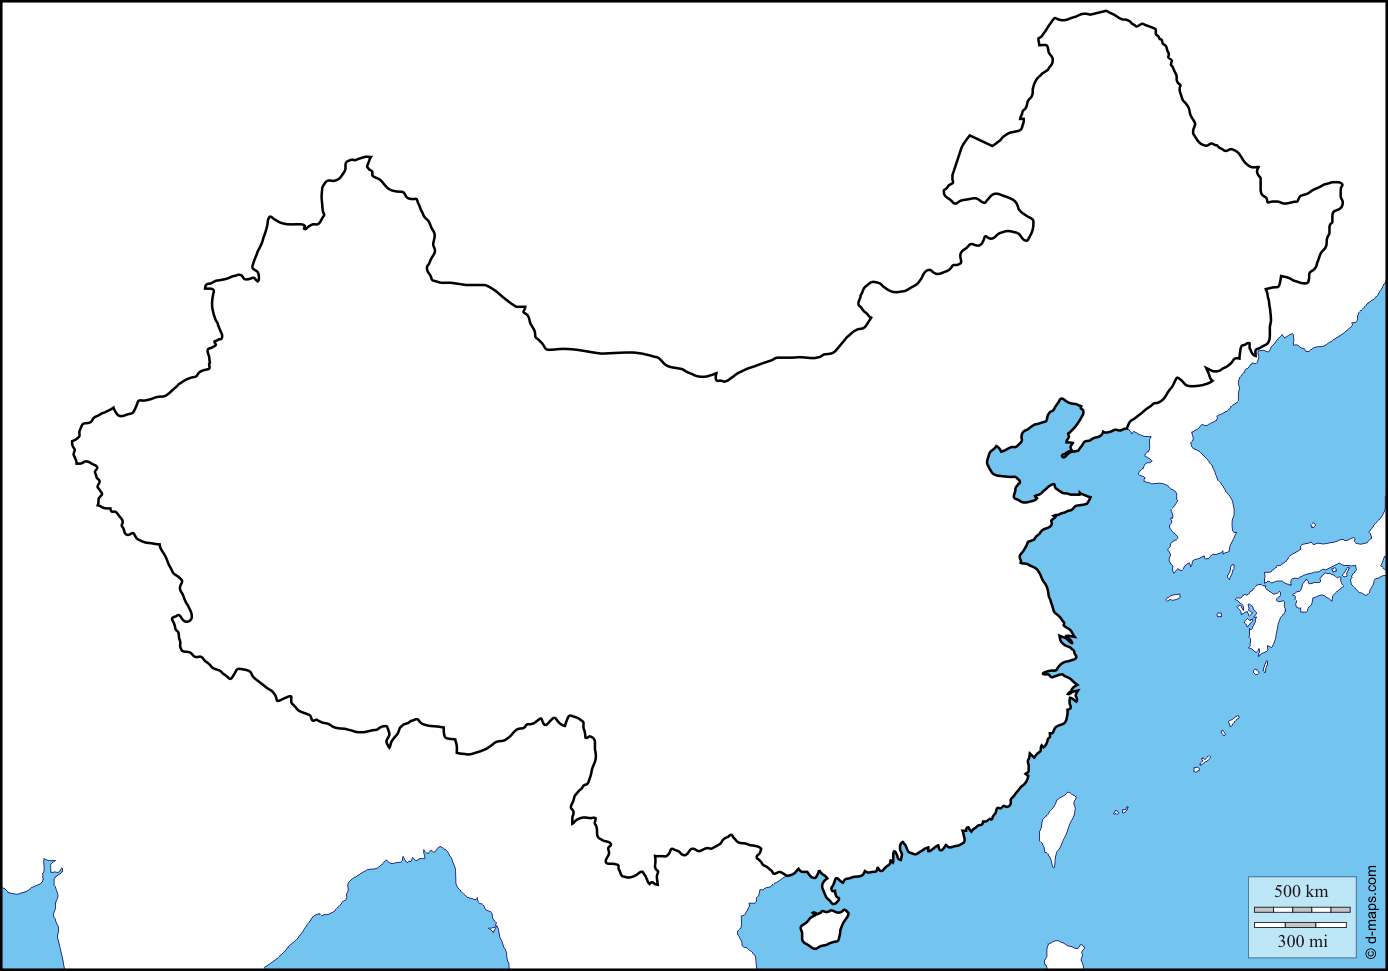 Free China Outline, Download Free China Outline png images, Free